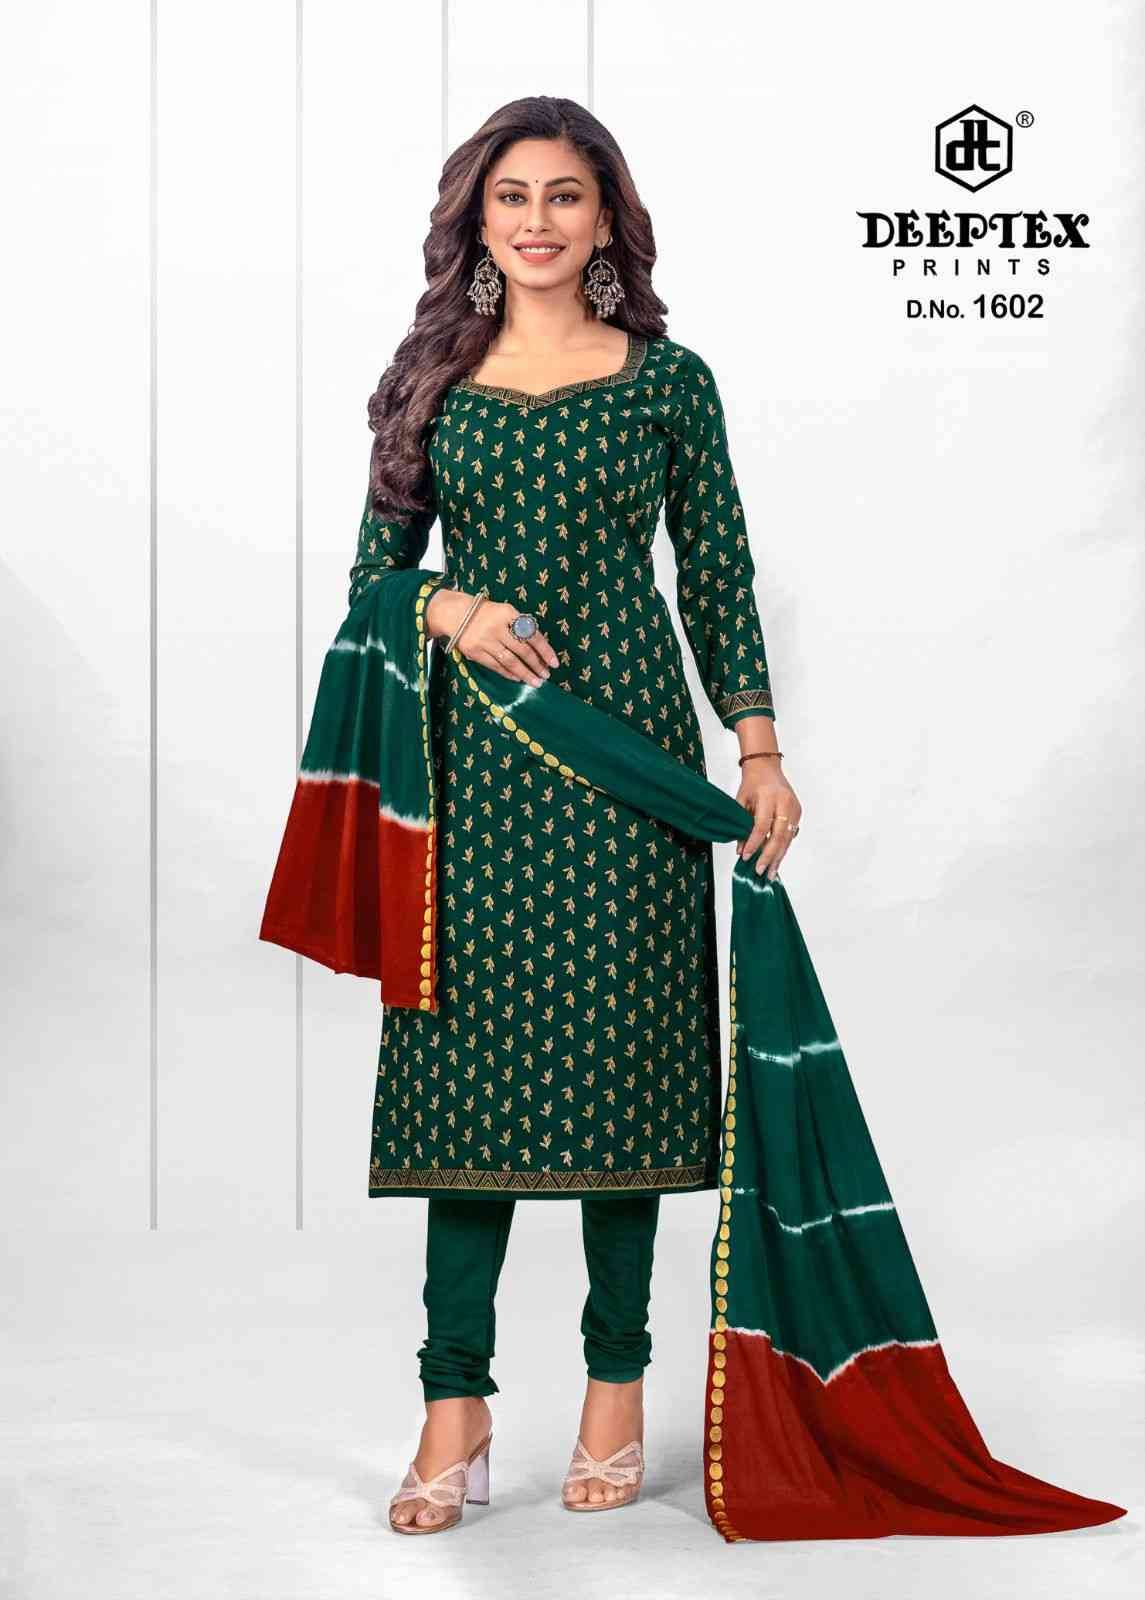 Tradition Vol-16 By Deeptex Prints 1601 To 1610 Series Beautiful Festive Suits Colorful Stylish Fancy Casual Wear & Ethnic Wear Pure Cotton Print Dresses At Wholesale Price